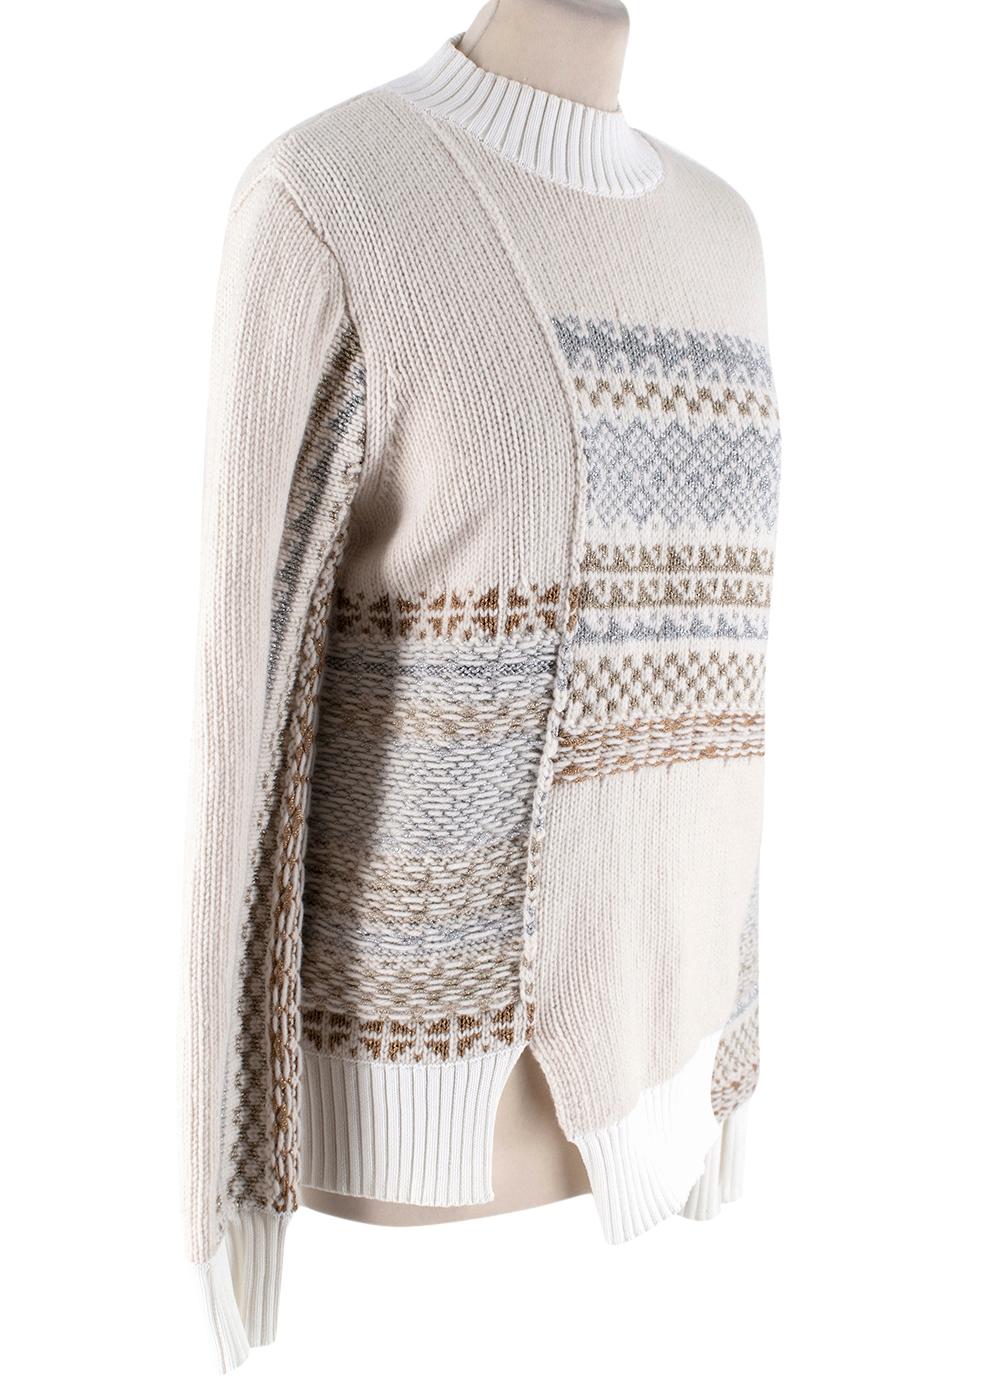 3.1 Phillip Lim Wool Embroidered Sweater

- Hight neckline 
- Ribbed knit to neckline, hemline and cuffs 
- Embroidered knit 
- Small slit at front 
- press piece 

Materials 
100% Wool 

Dry clean only 

shoulders: 11cm
sleeves: 67cm
Length: 60cm